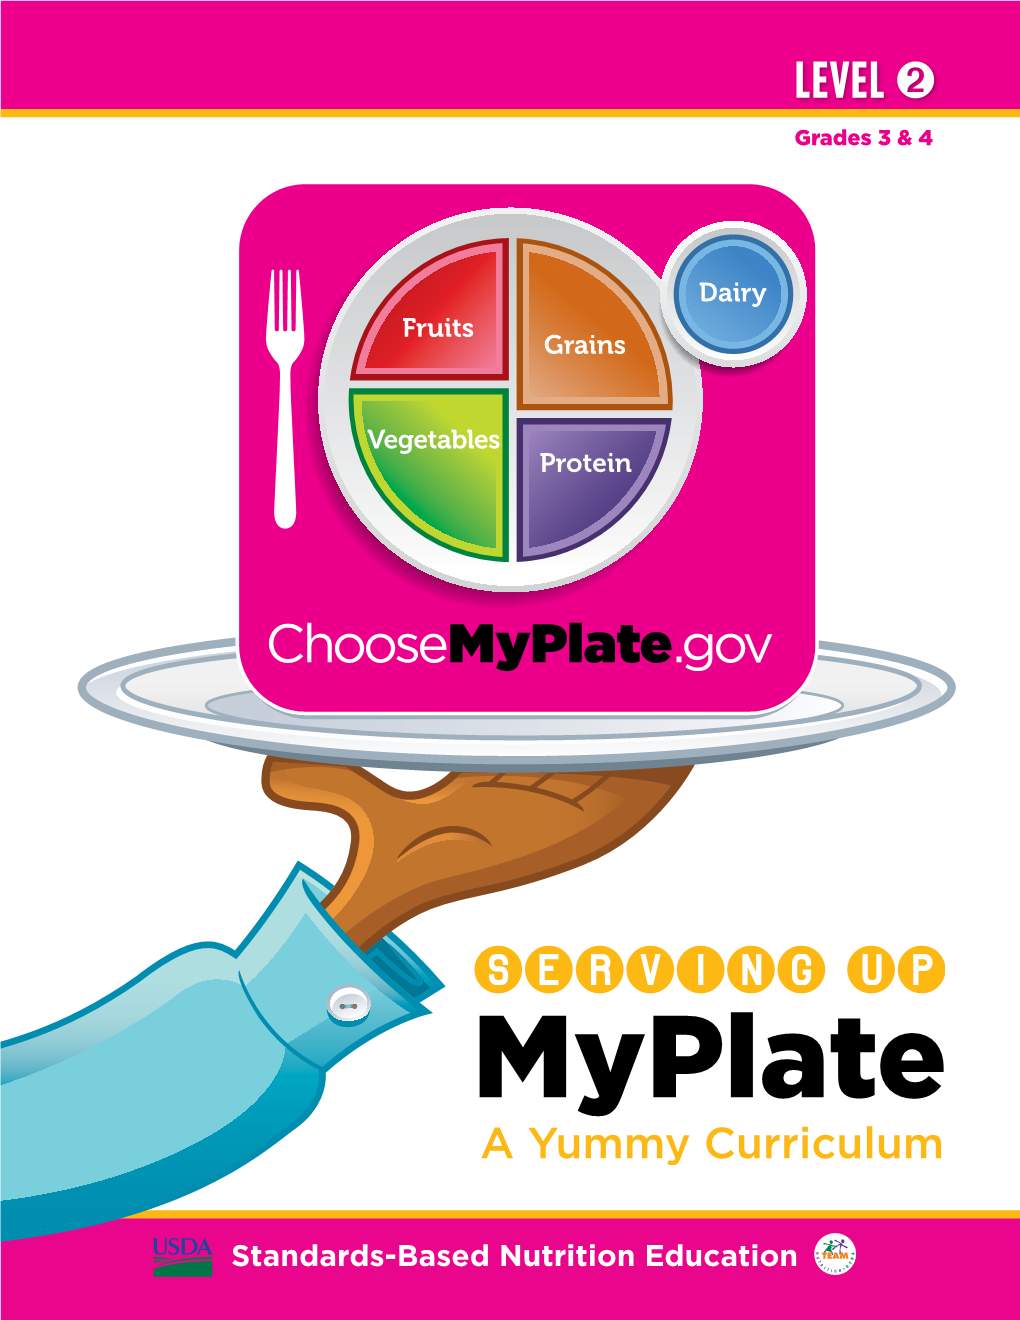 Serving up Myplate-A Yummy Curriculum, Level 2